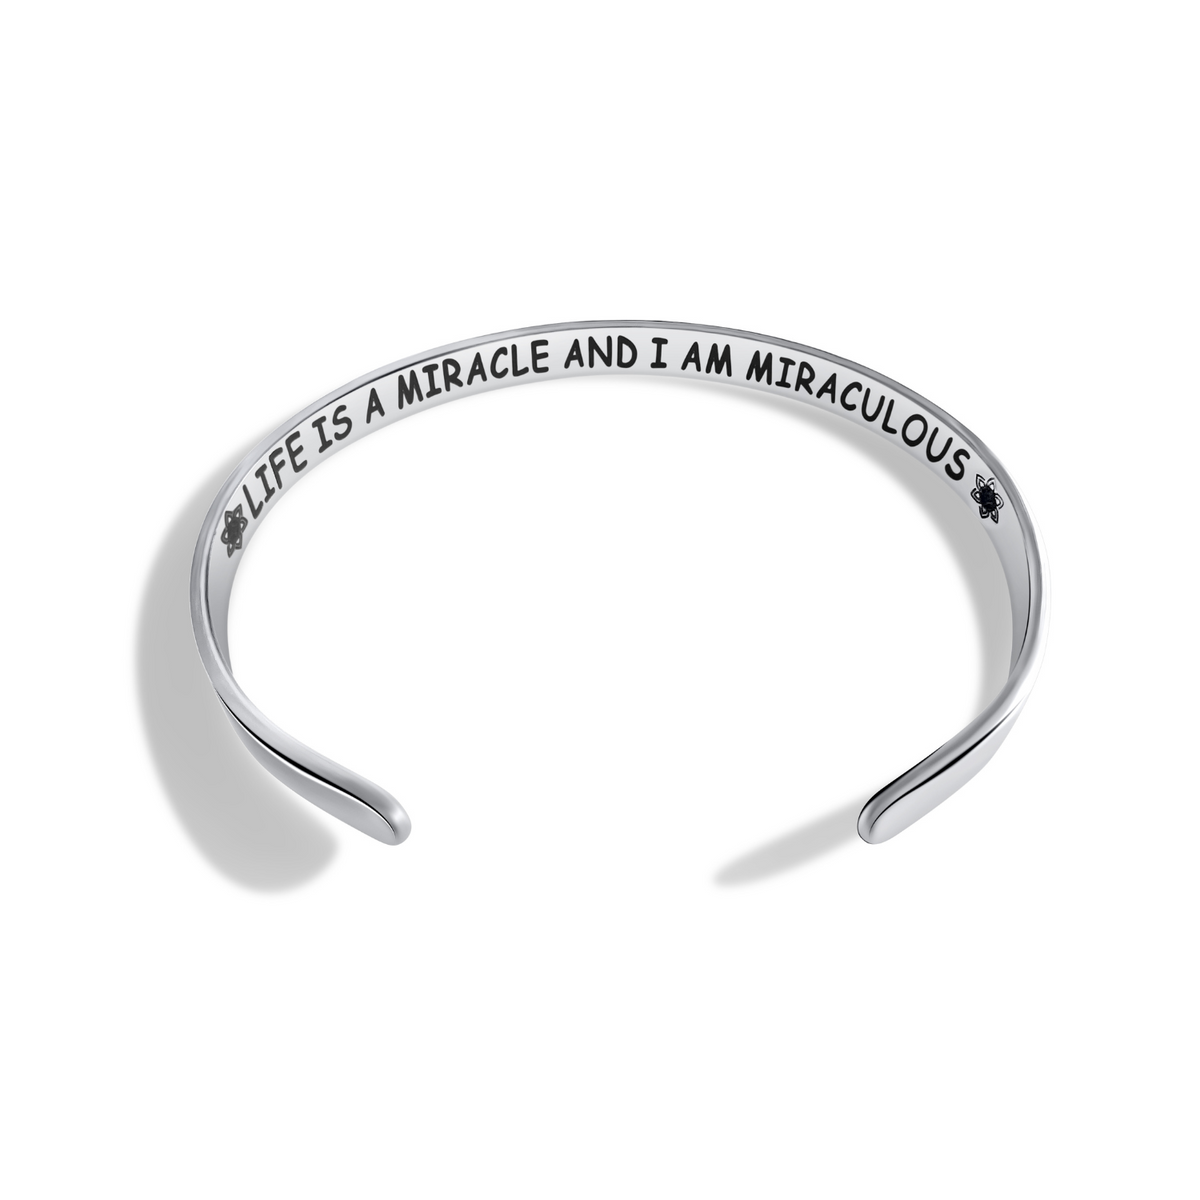 Life is a Miracle and I Am Miraculous (Mantra Cuff)